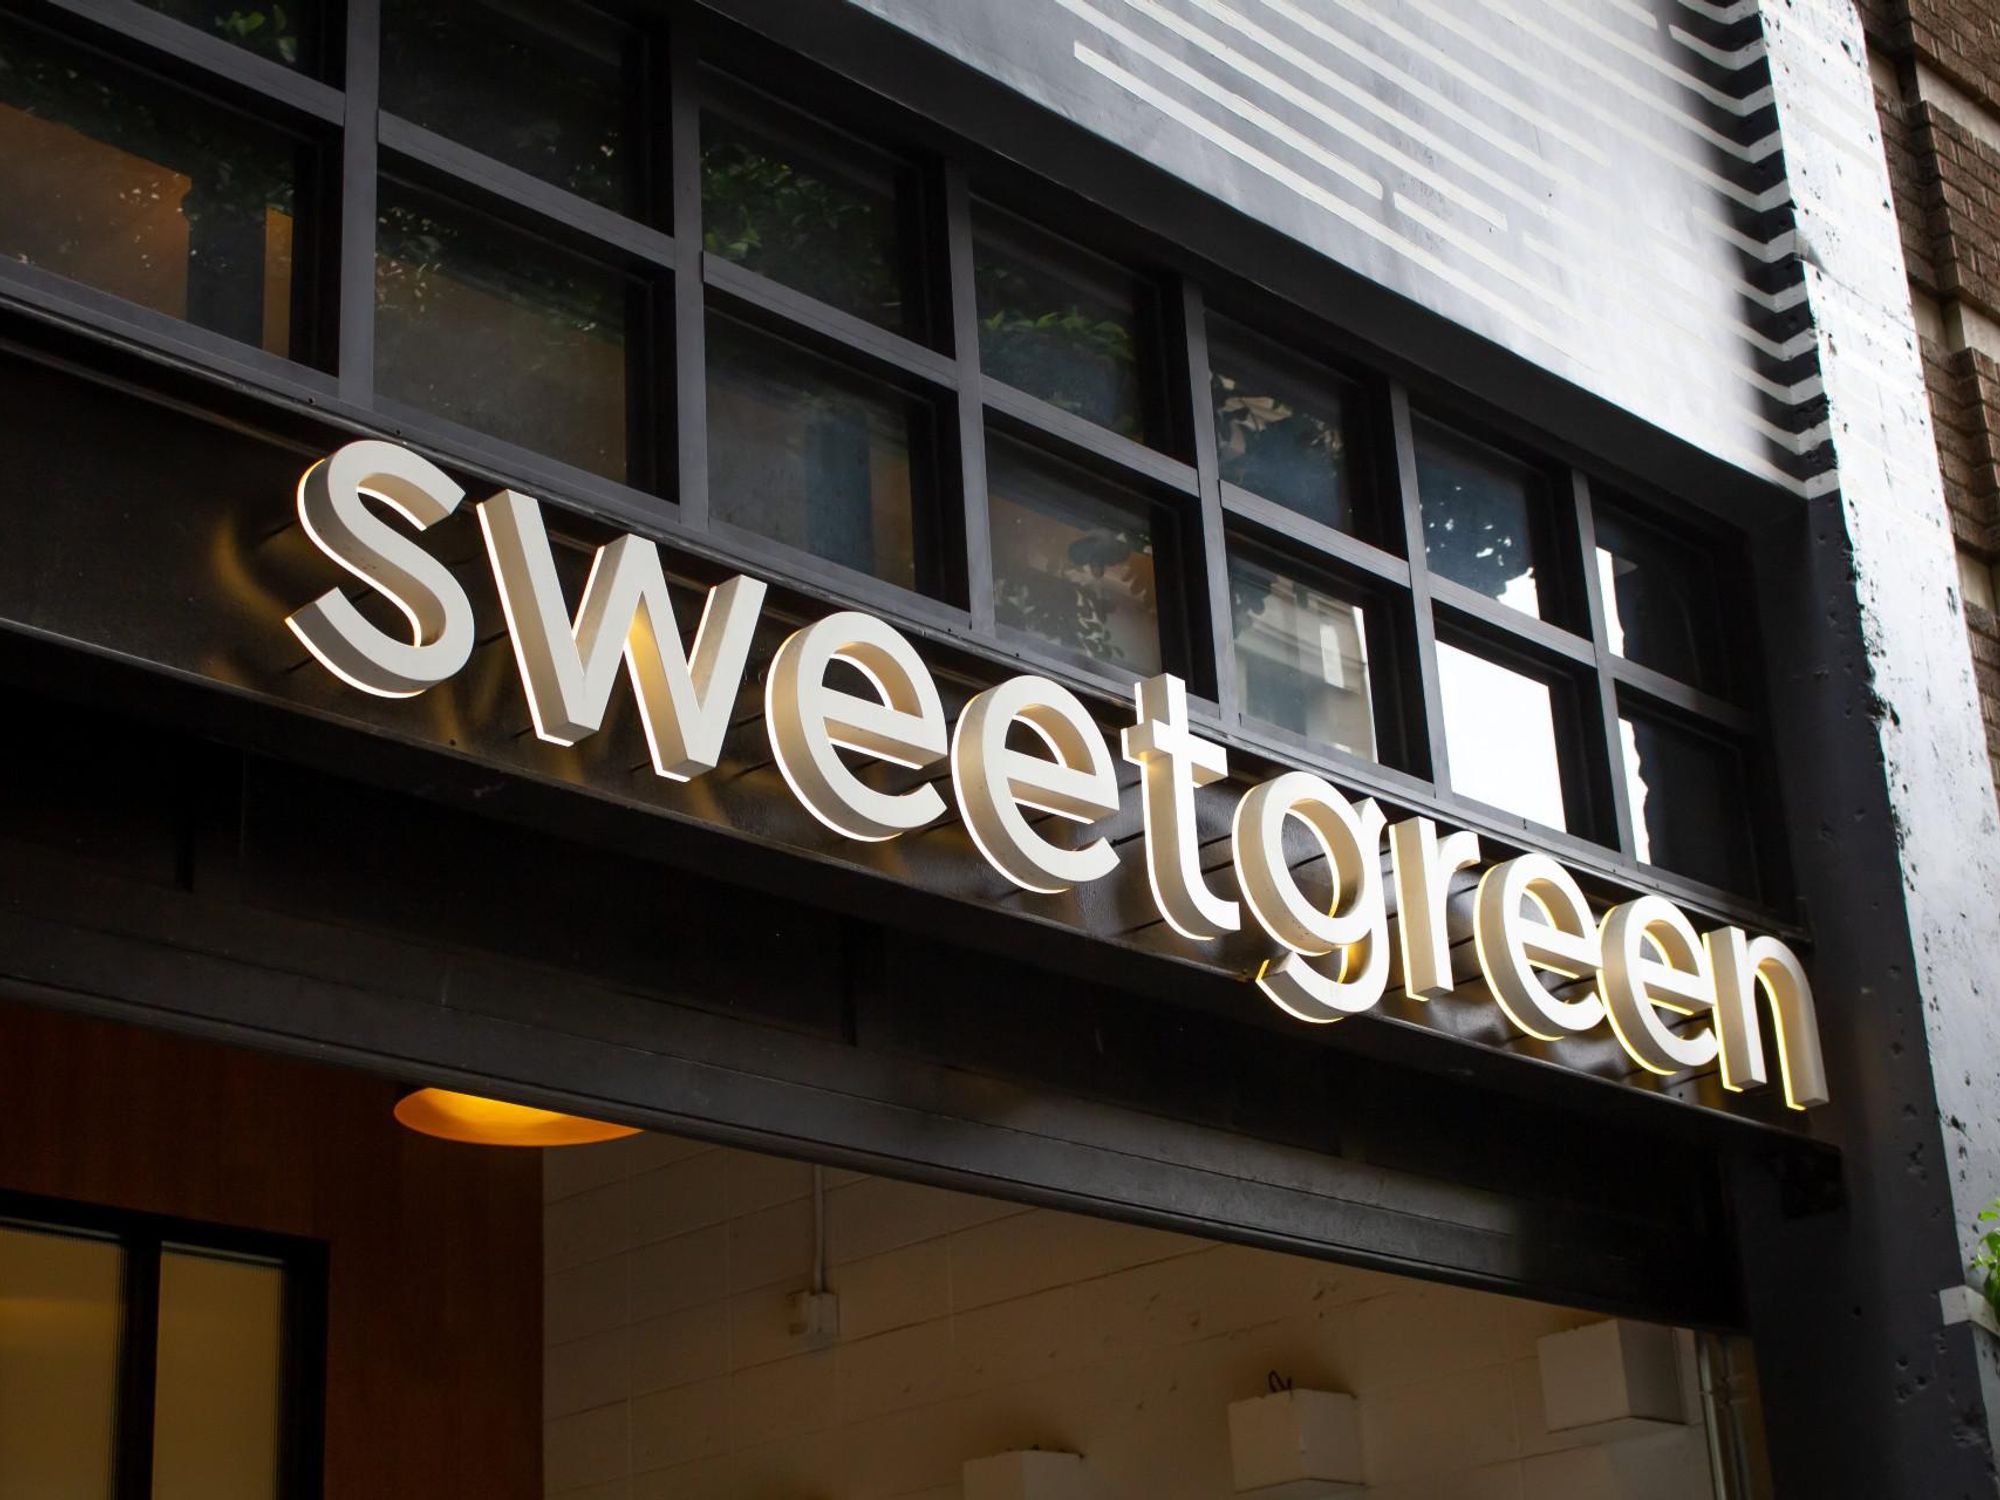 What You Must Know Ahead of Sweetgreen's IPO